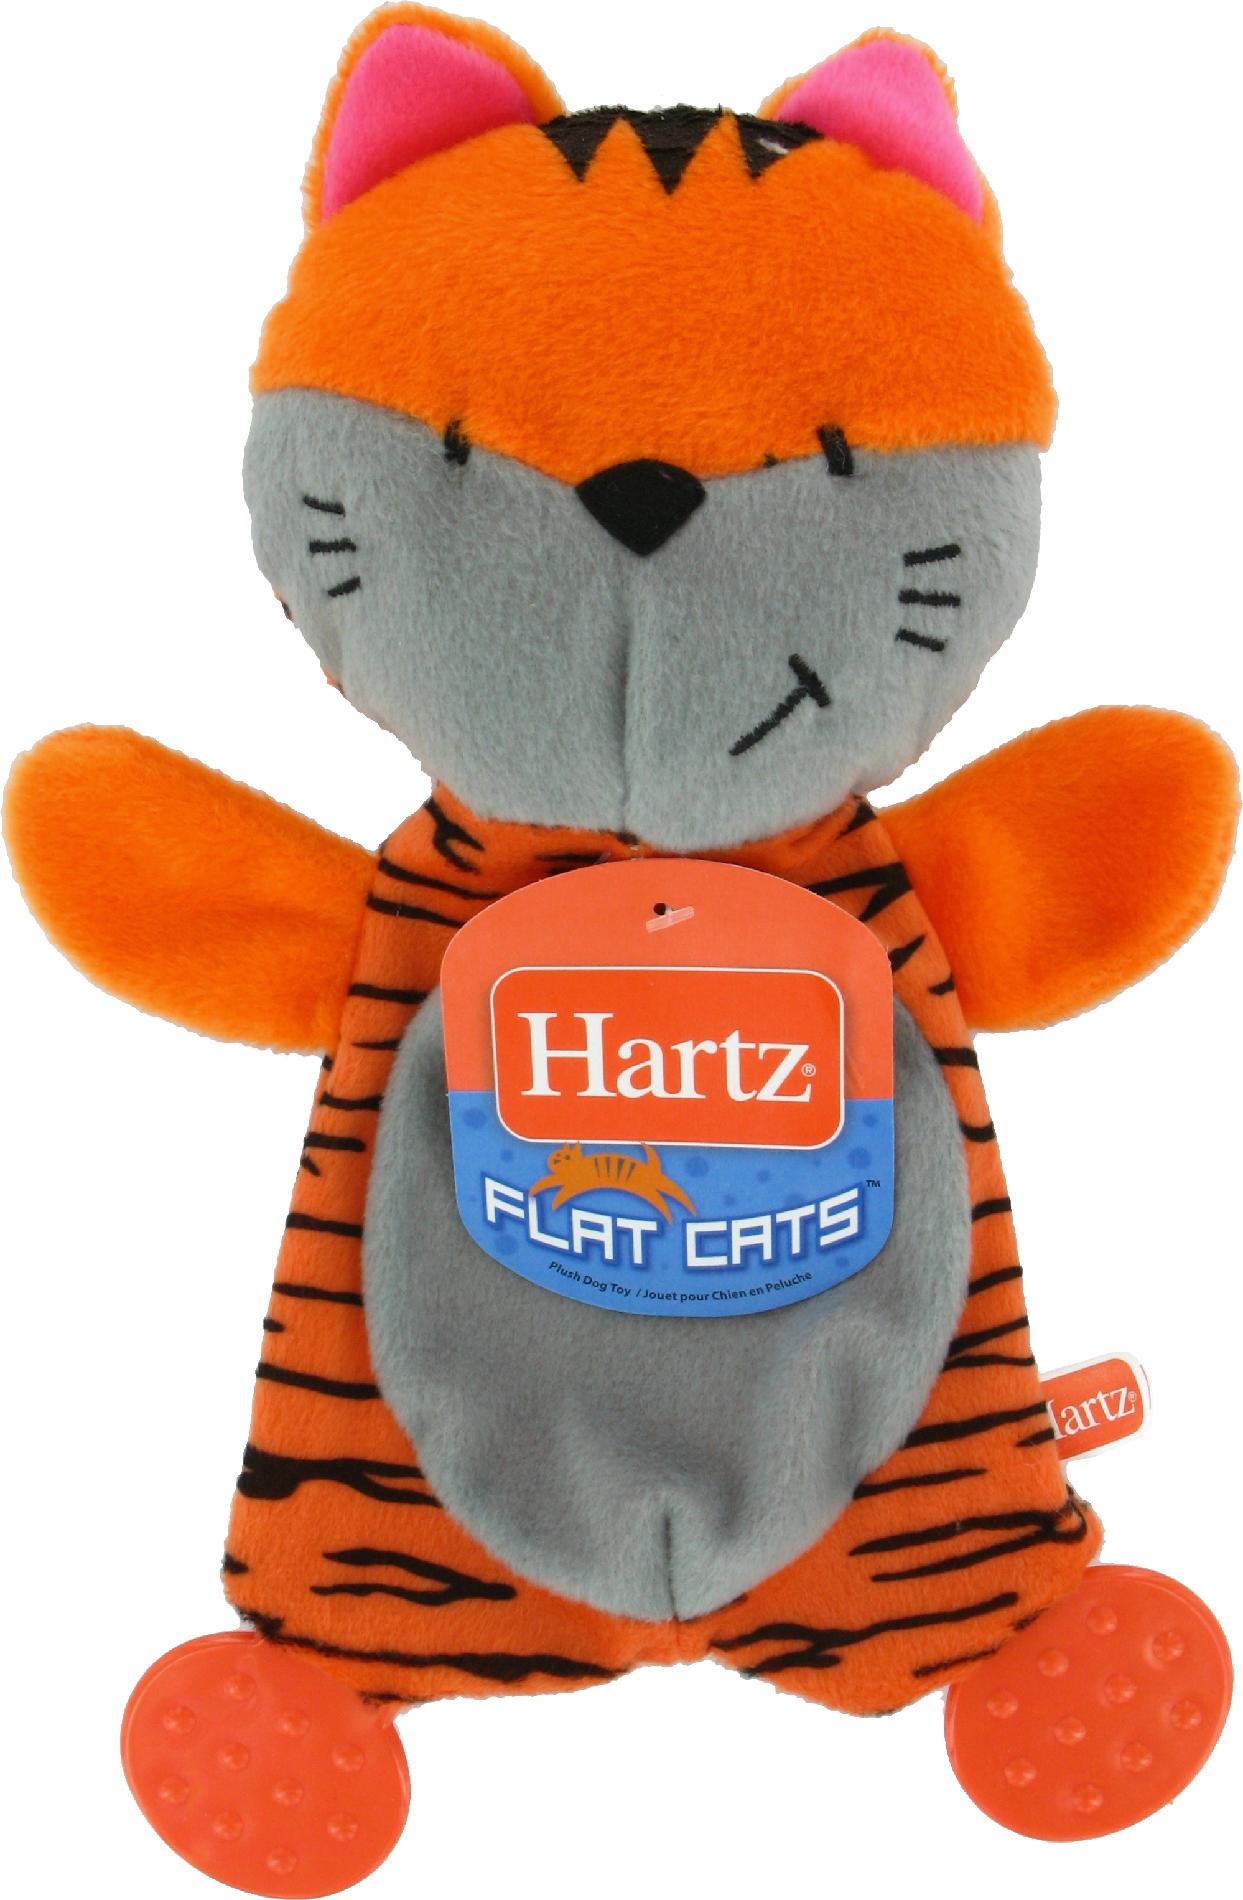 0032700128999 - FLAT CATS DOG TOY